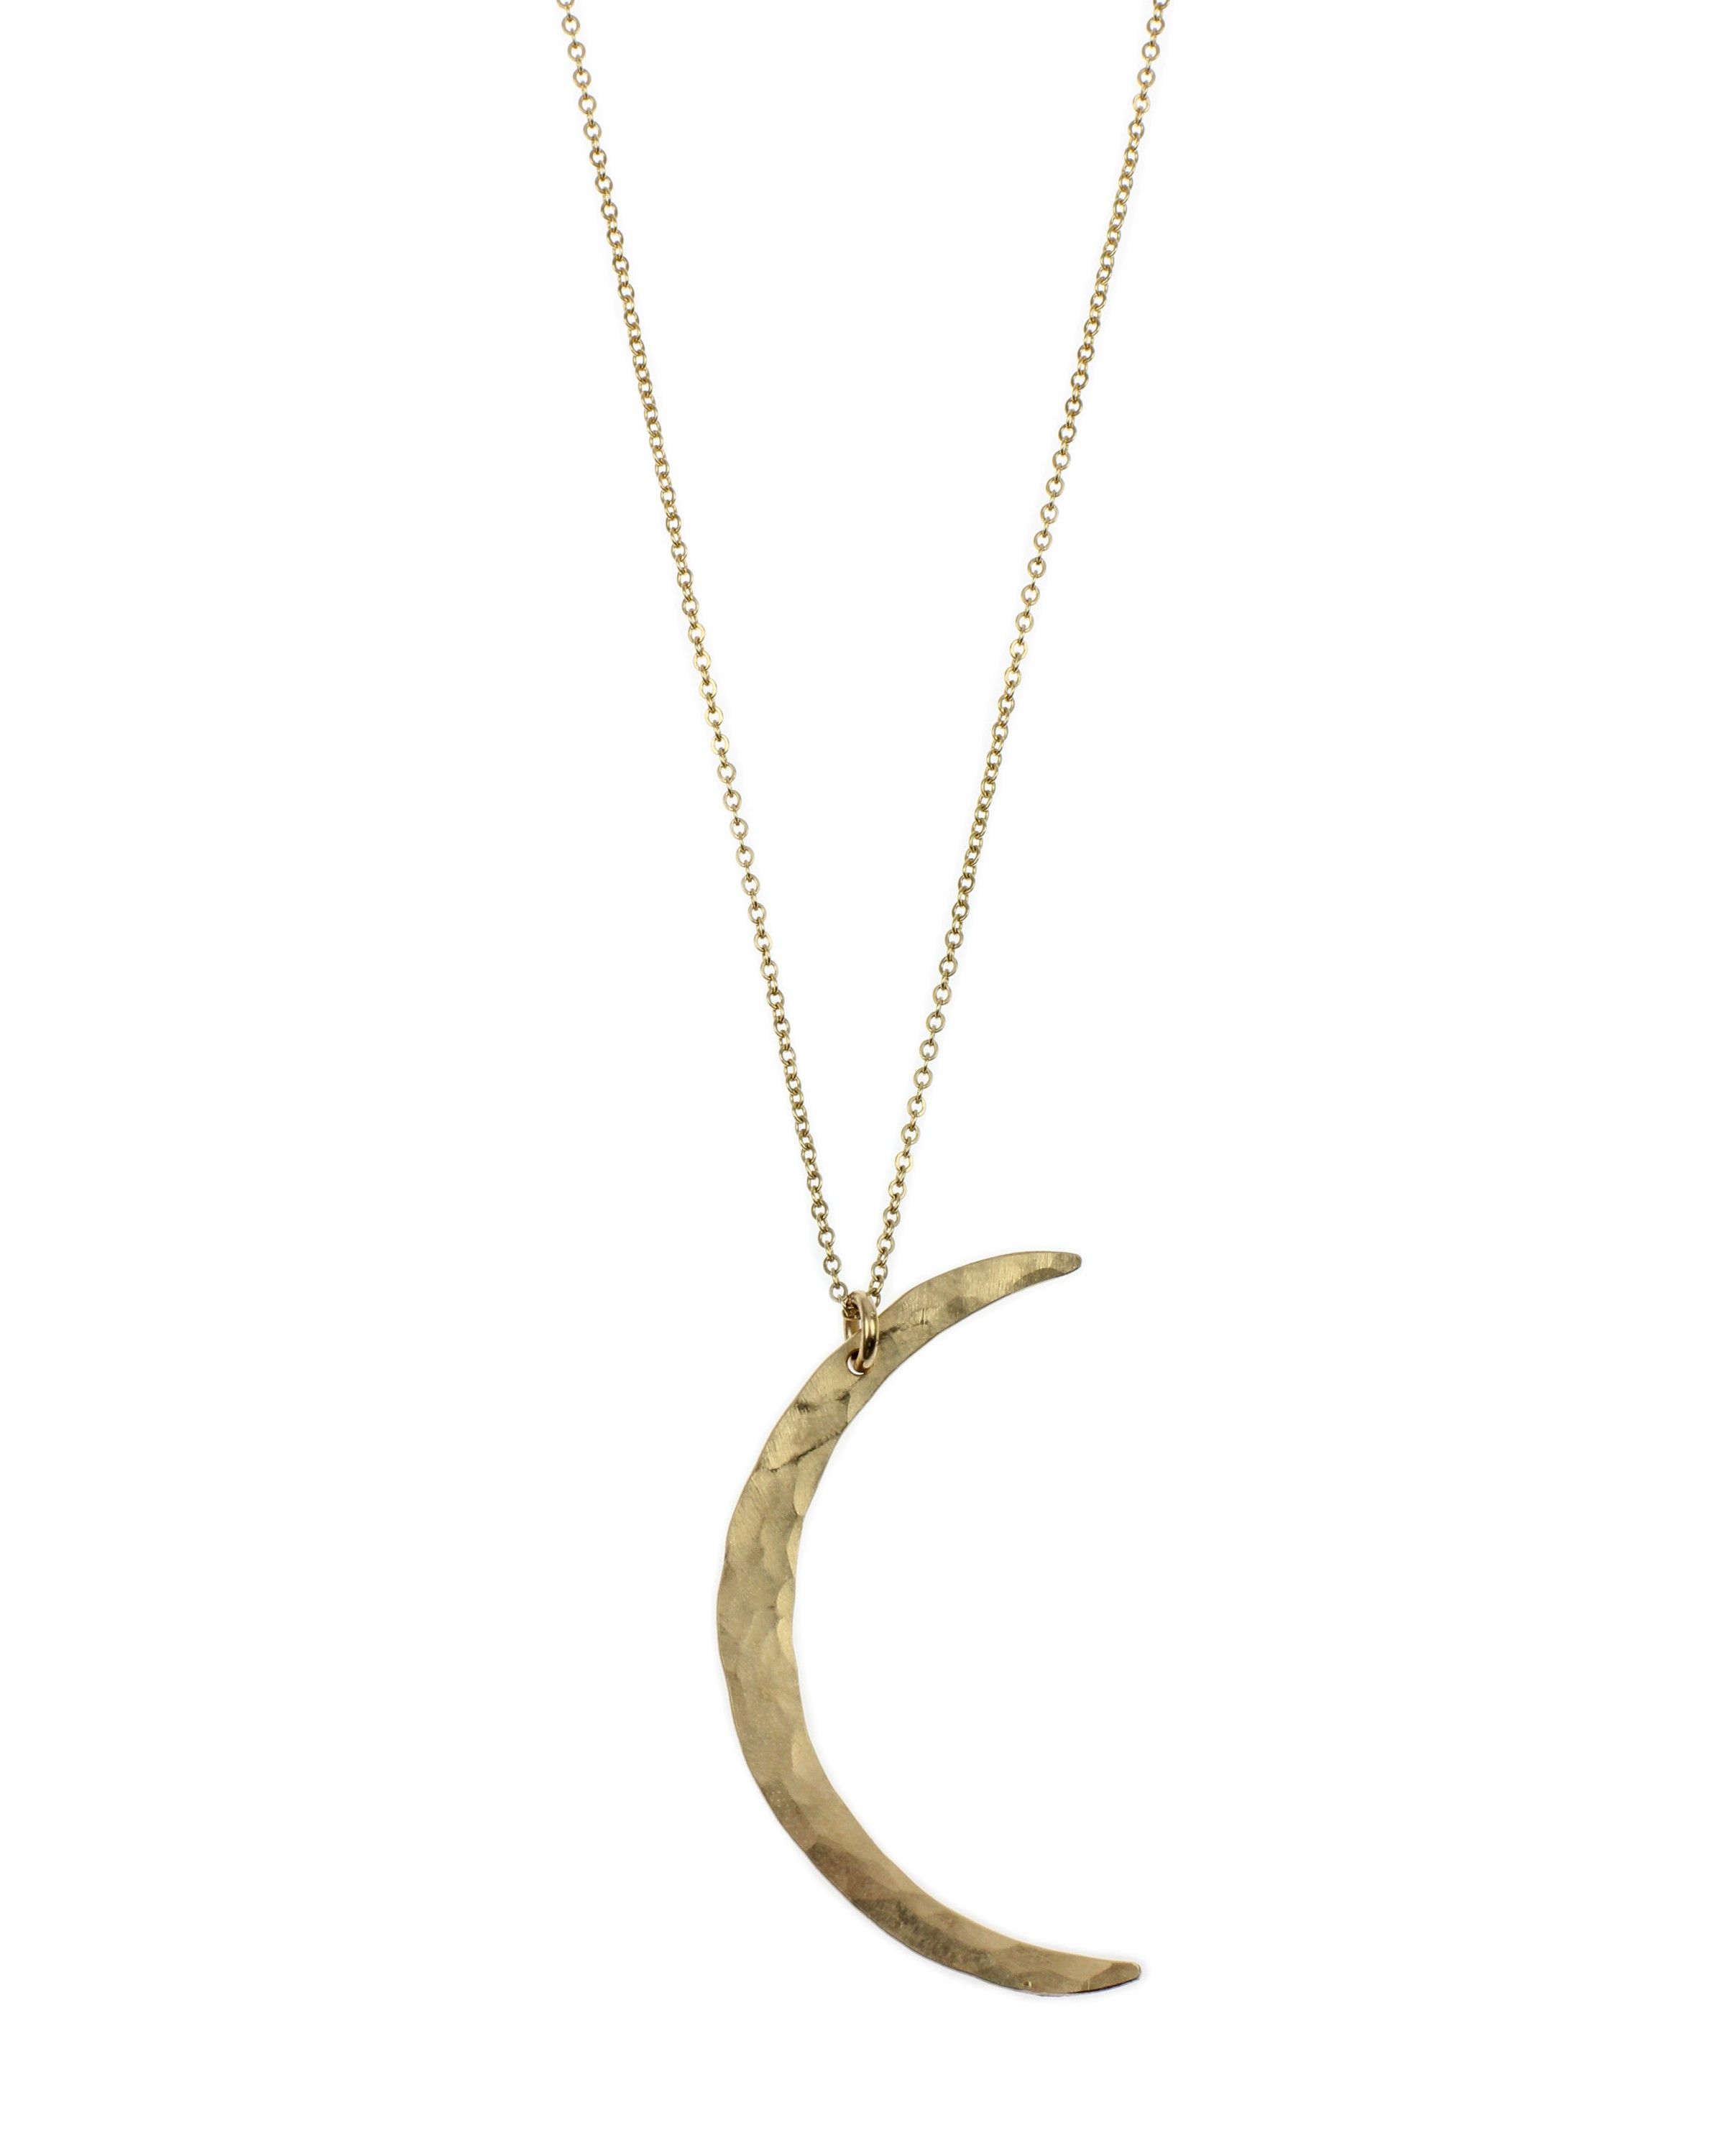 Handmade Moon Necklace | Personalized Gold Jewelry | Thangs ...